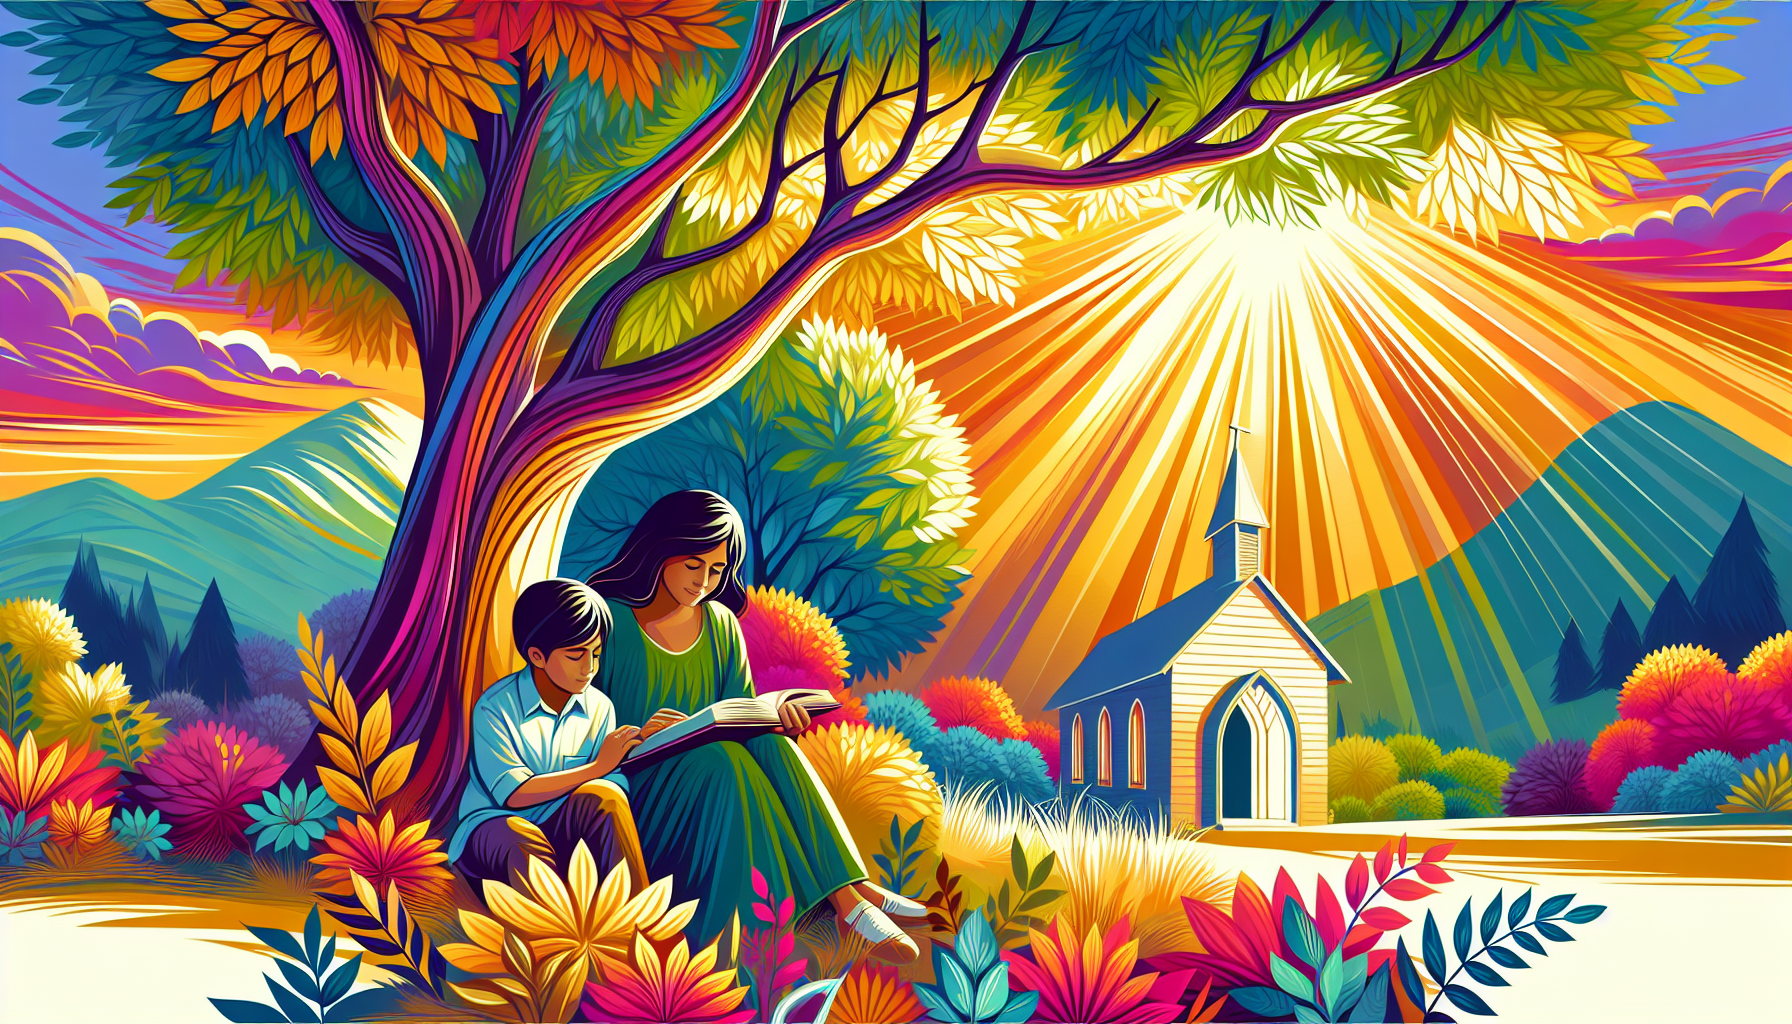 A serene, peaceful image of a mother and child sitting under a blossoming tree, reading a Christian poem together, with soft sunlight filtering through the leaves and a small, open chapel visible in t